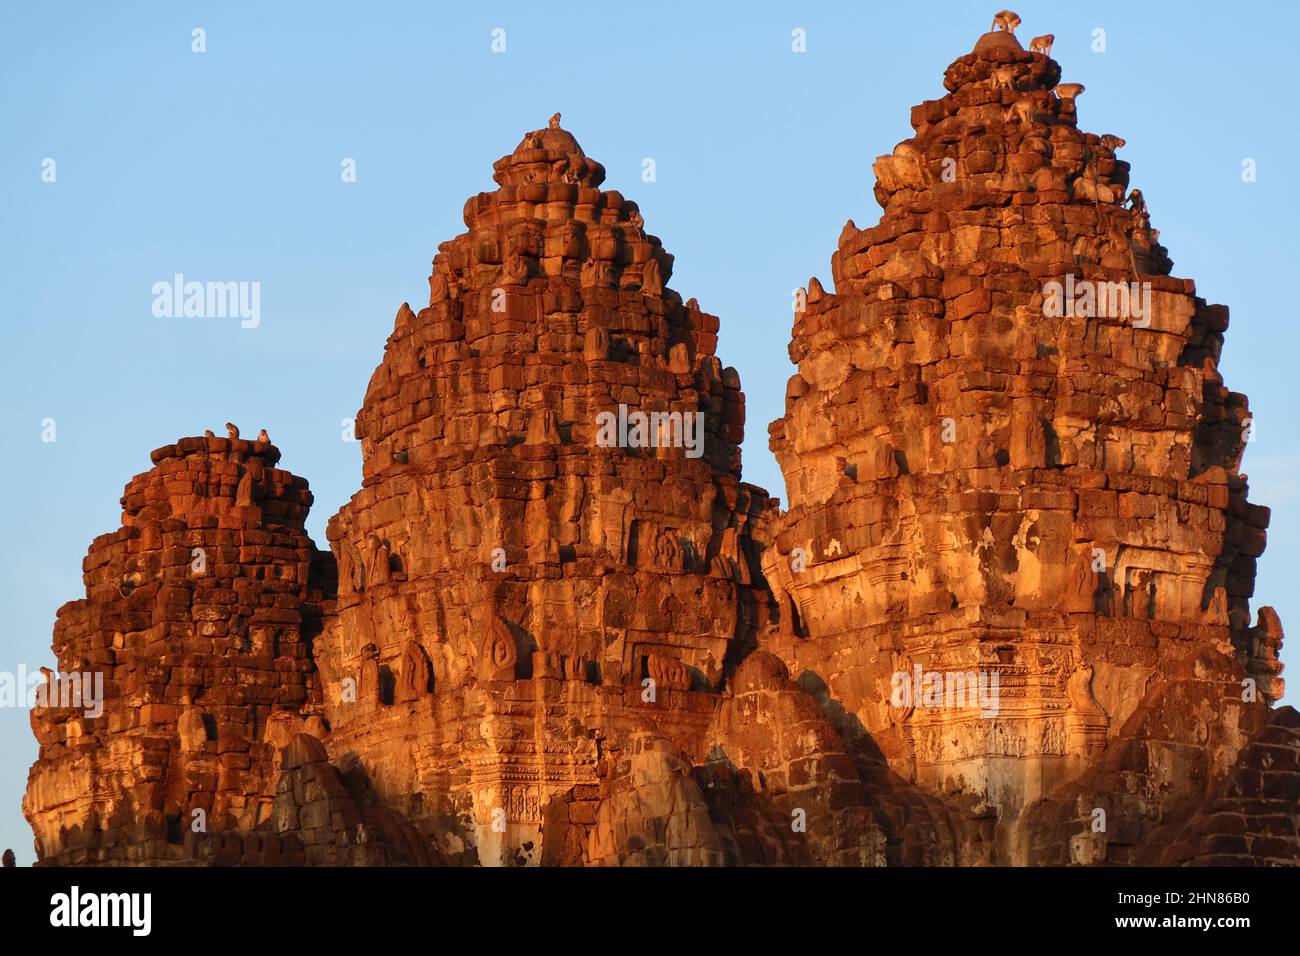 The Stupa’s in the Golden light with monkeys at Phra Prang Sam Yot Buddhist Temple, Lopburi, Thailand Stock Photo